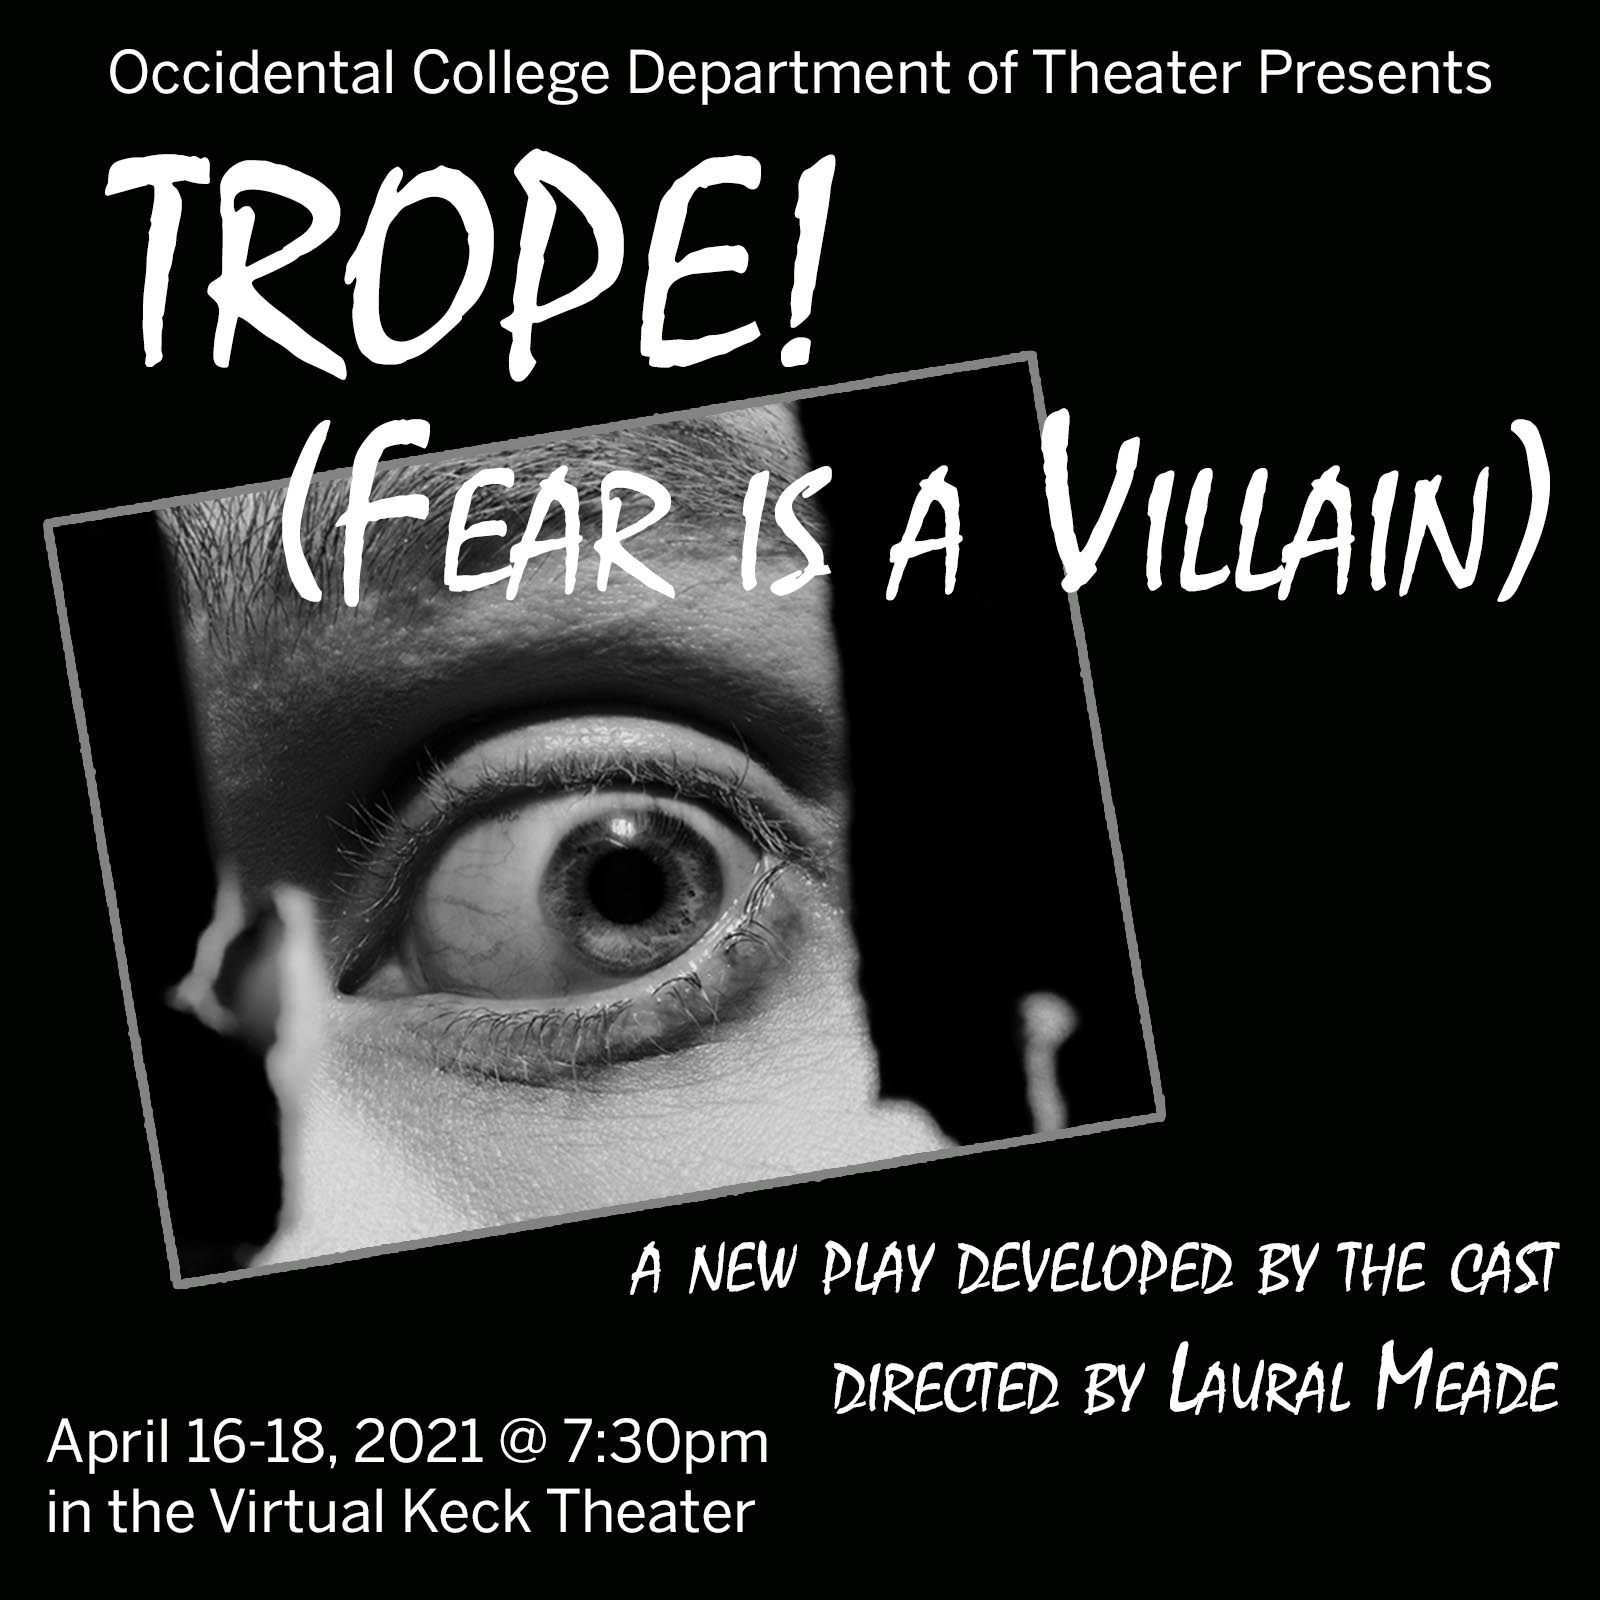 Poster for Trope! (Fear Is a Villain)